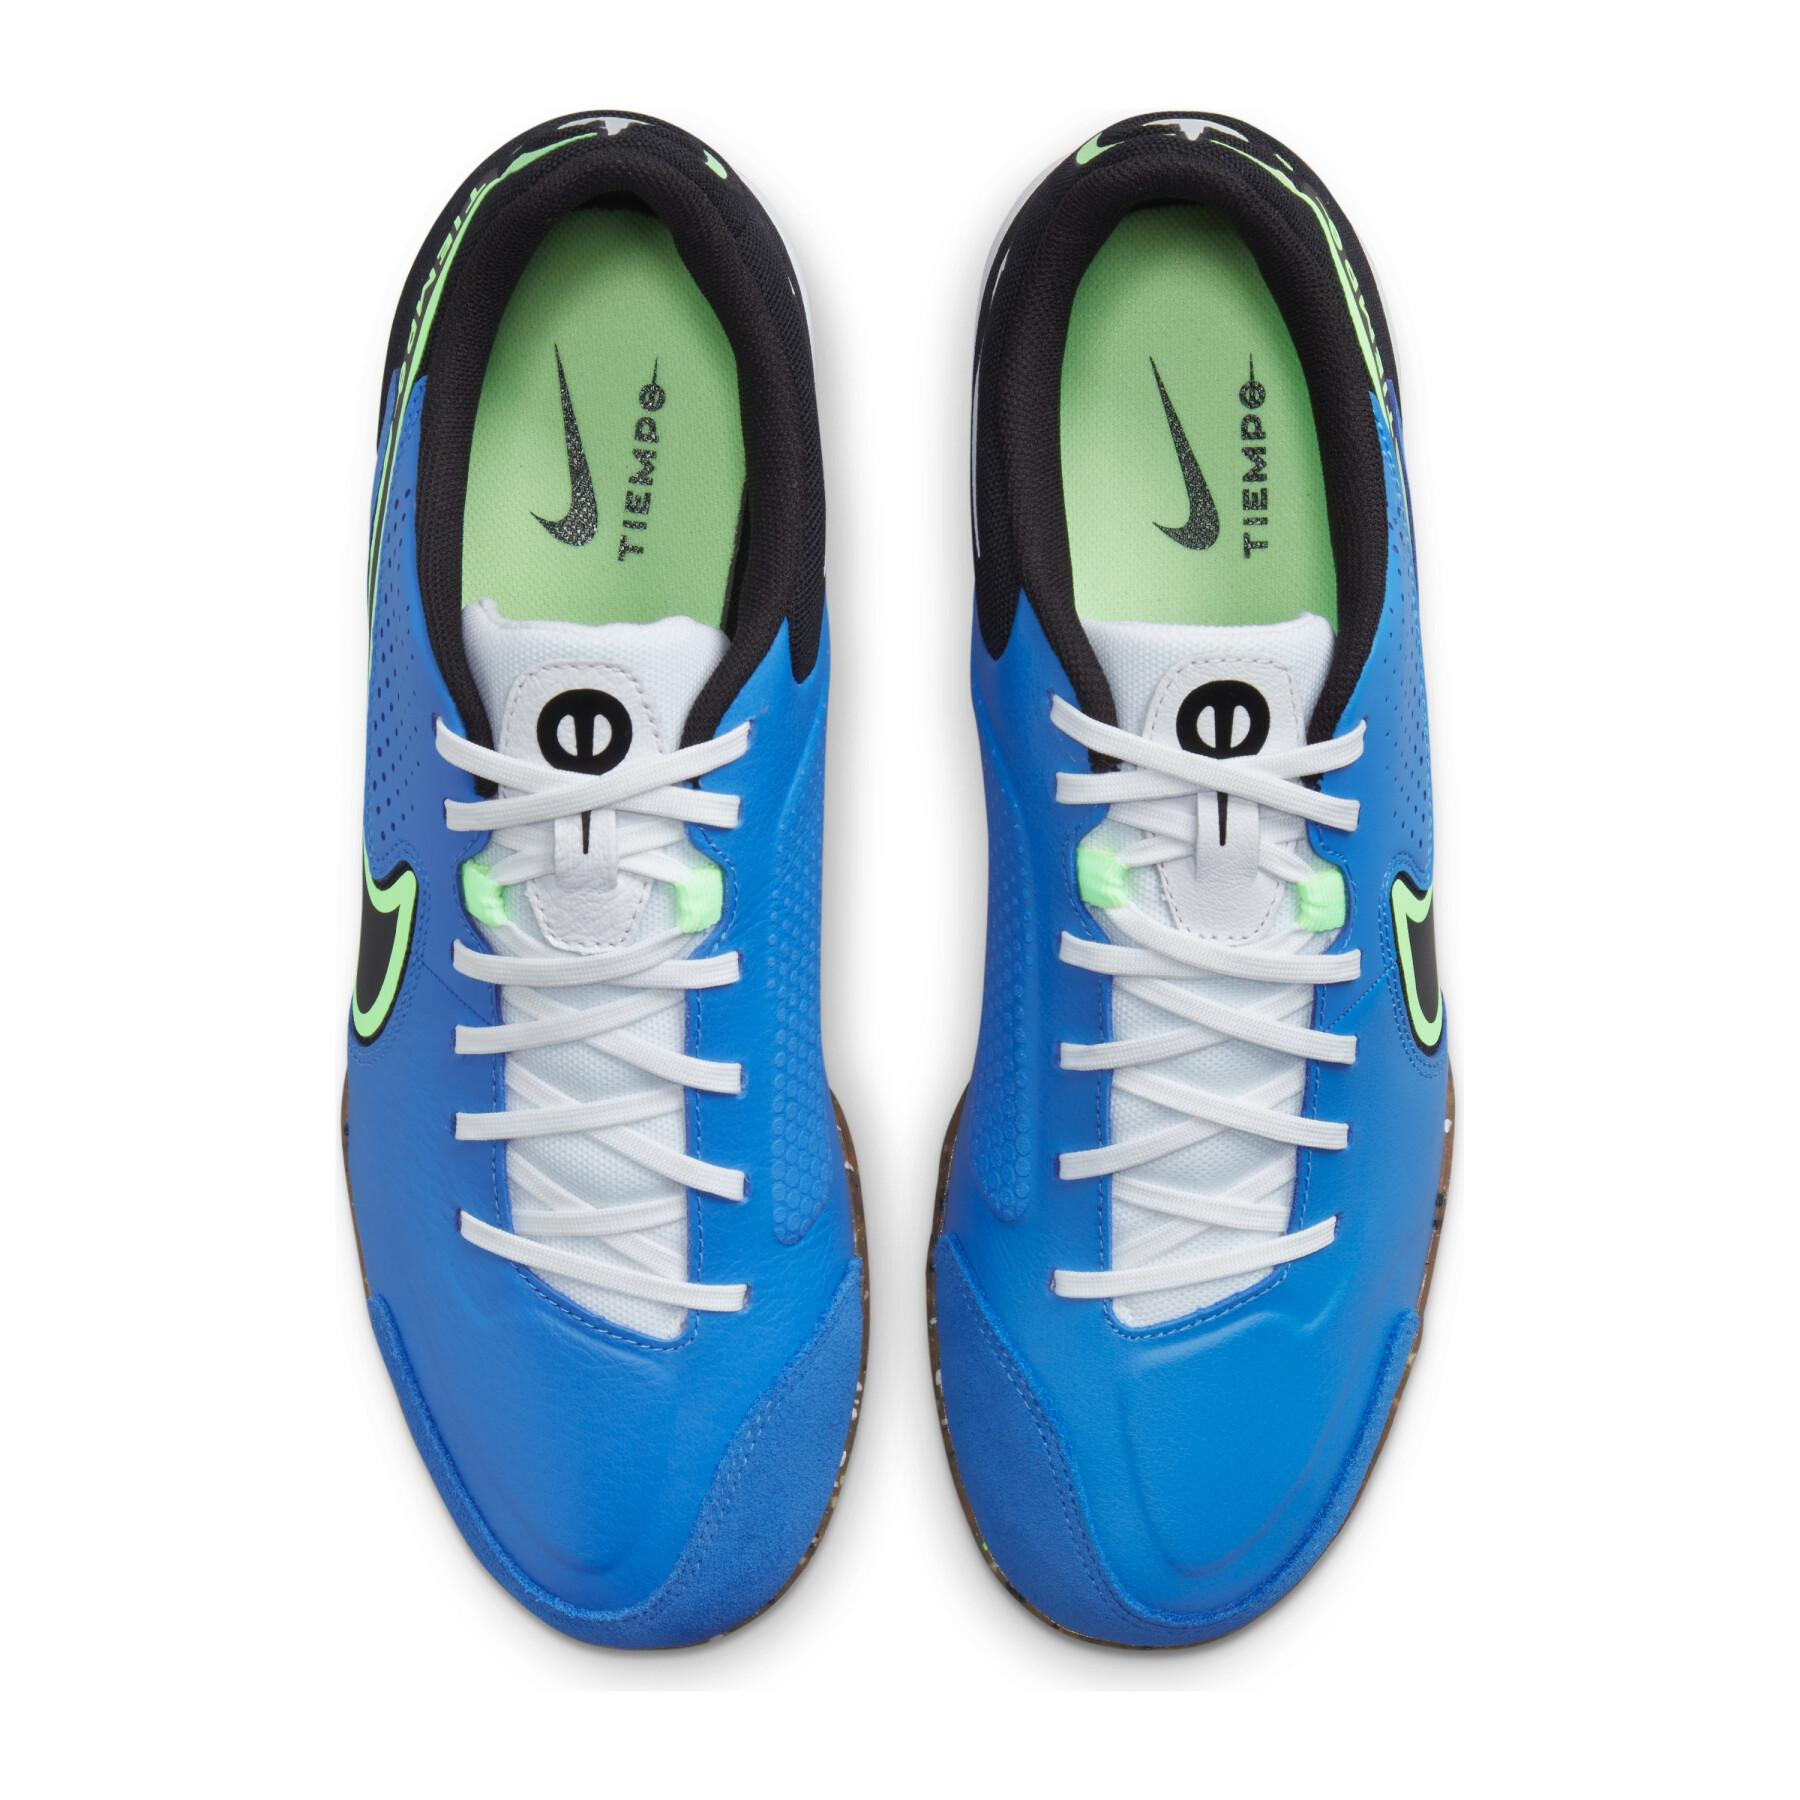 Shoes Nike Tiempo Legend 9 Academy IC